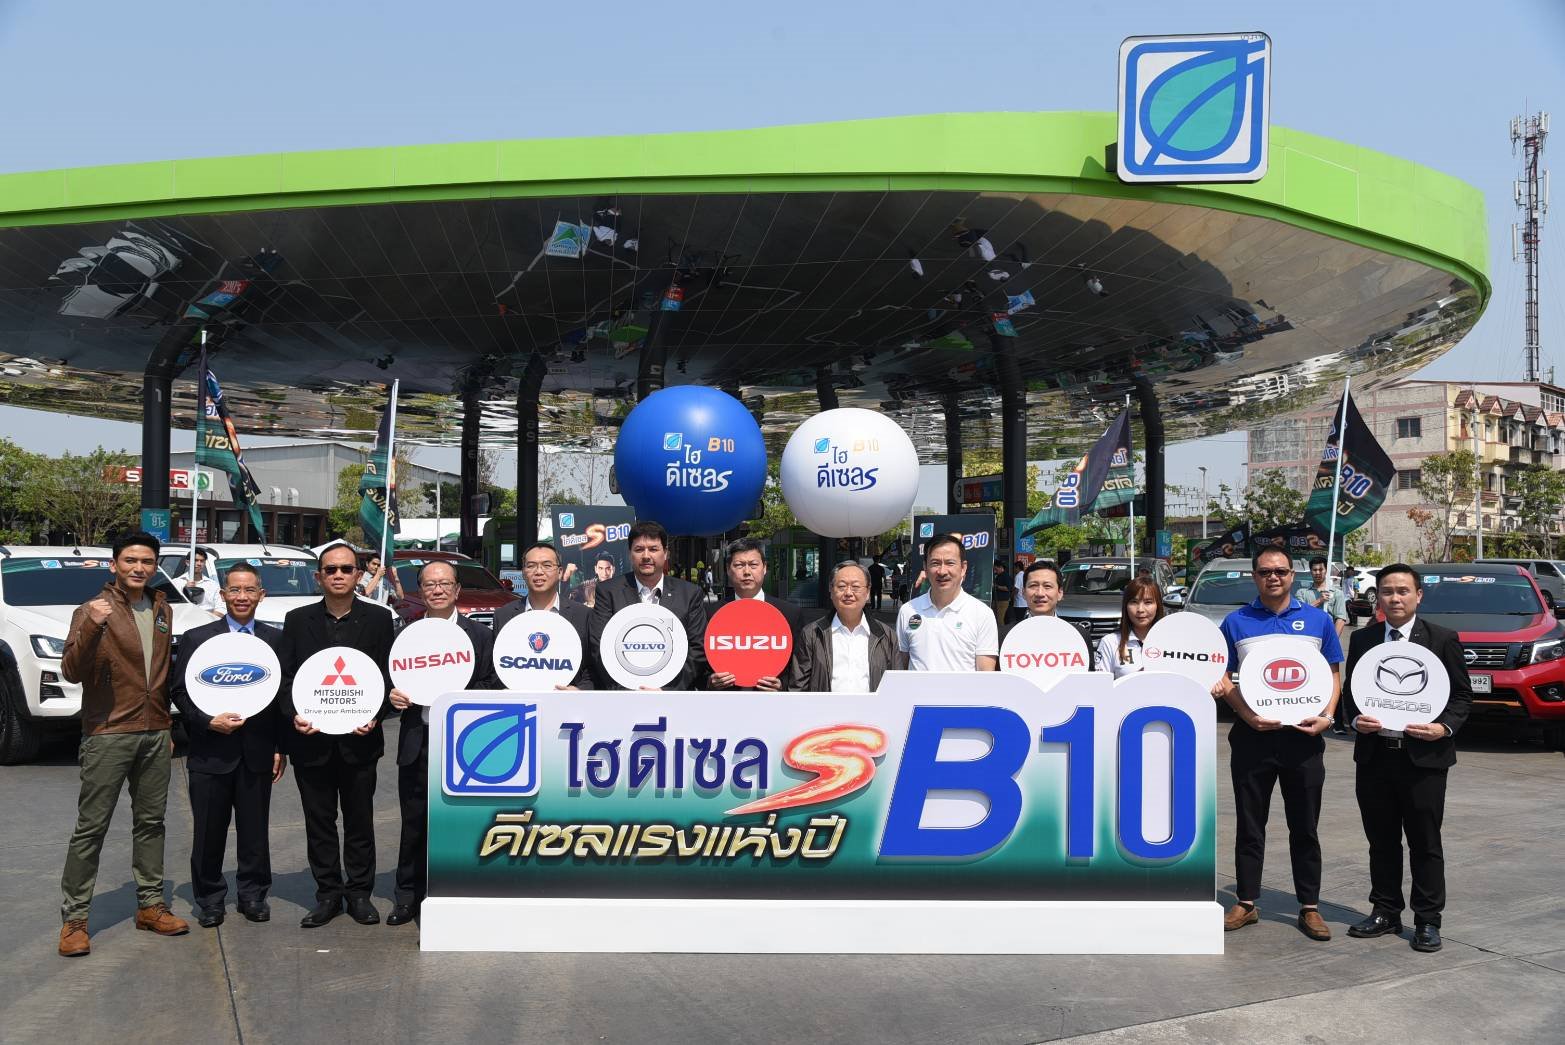 Bangchak Launches “Hi Diesel S B 10” at Over 400 Service Stations to Reduce Dust, Increase Palm Price